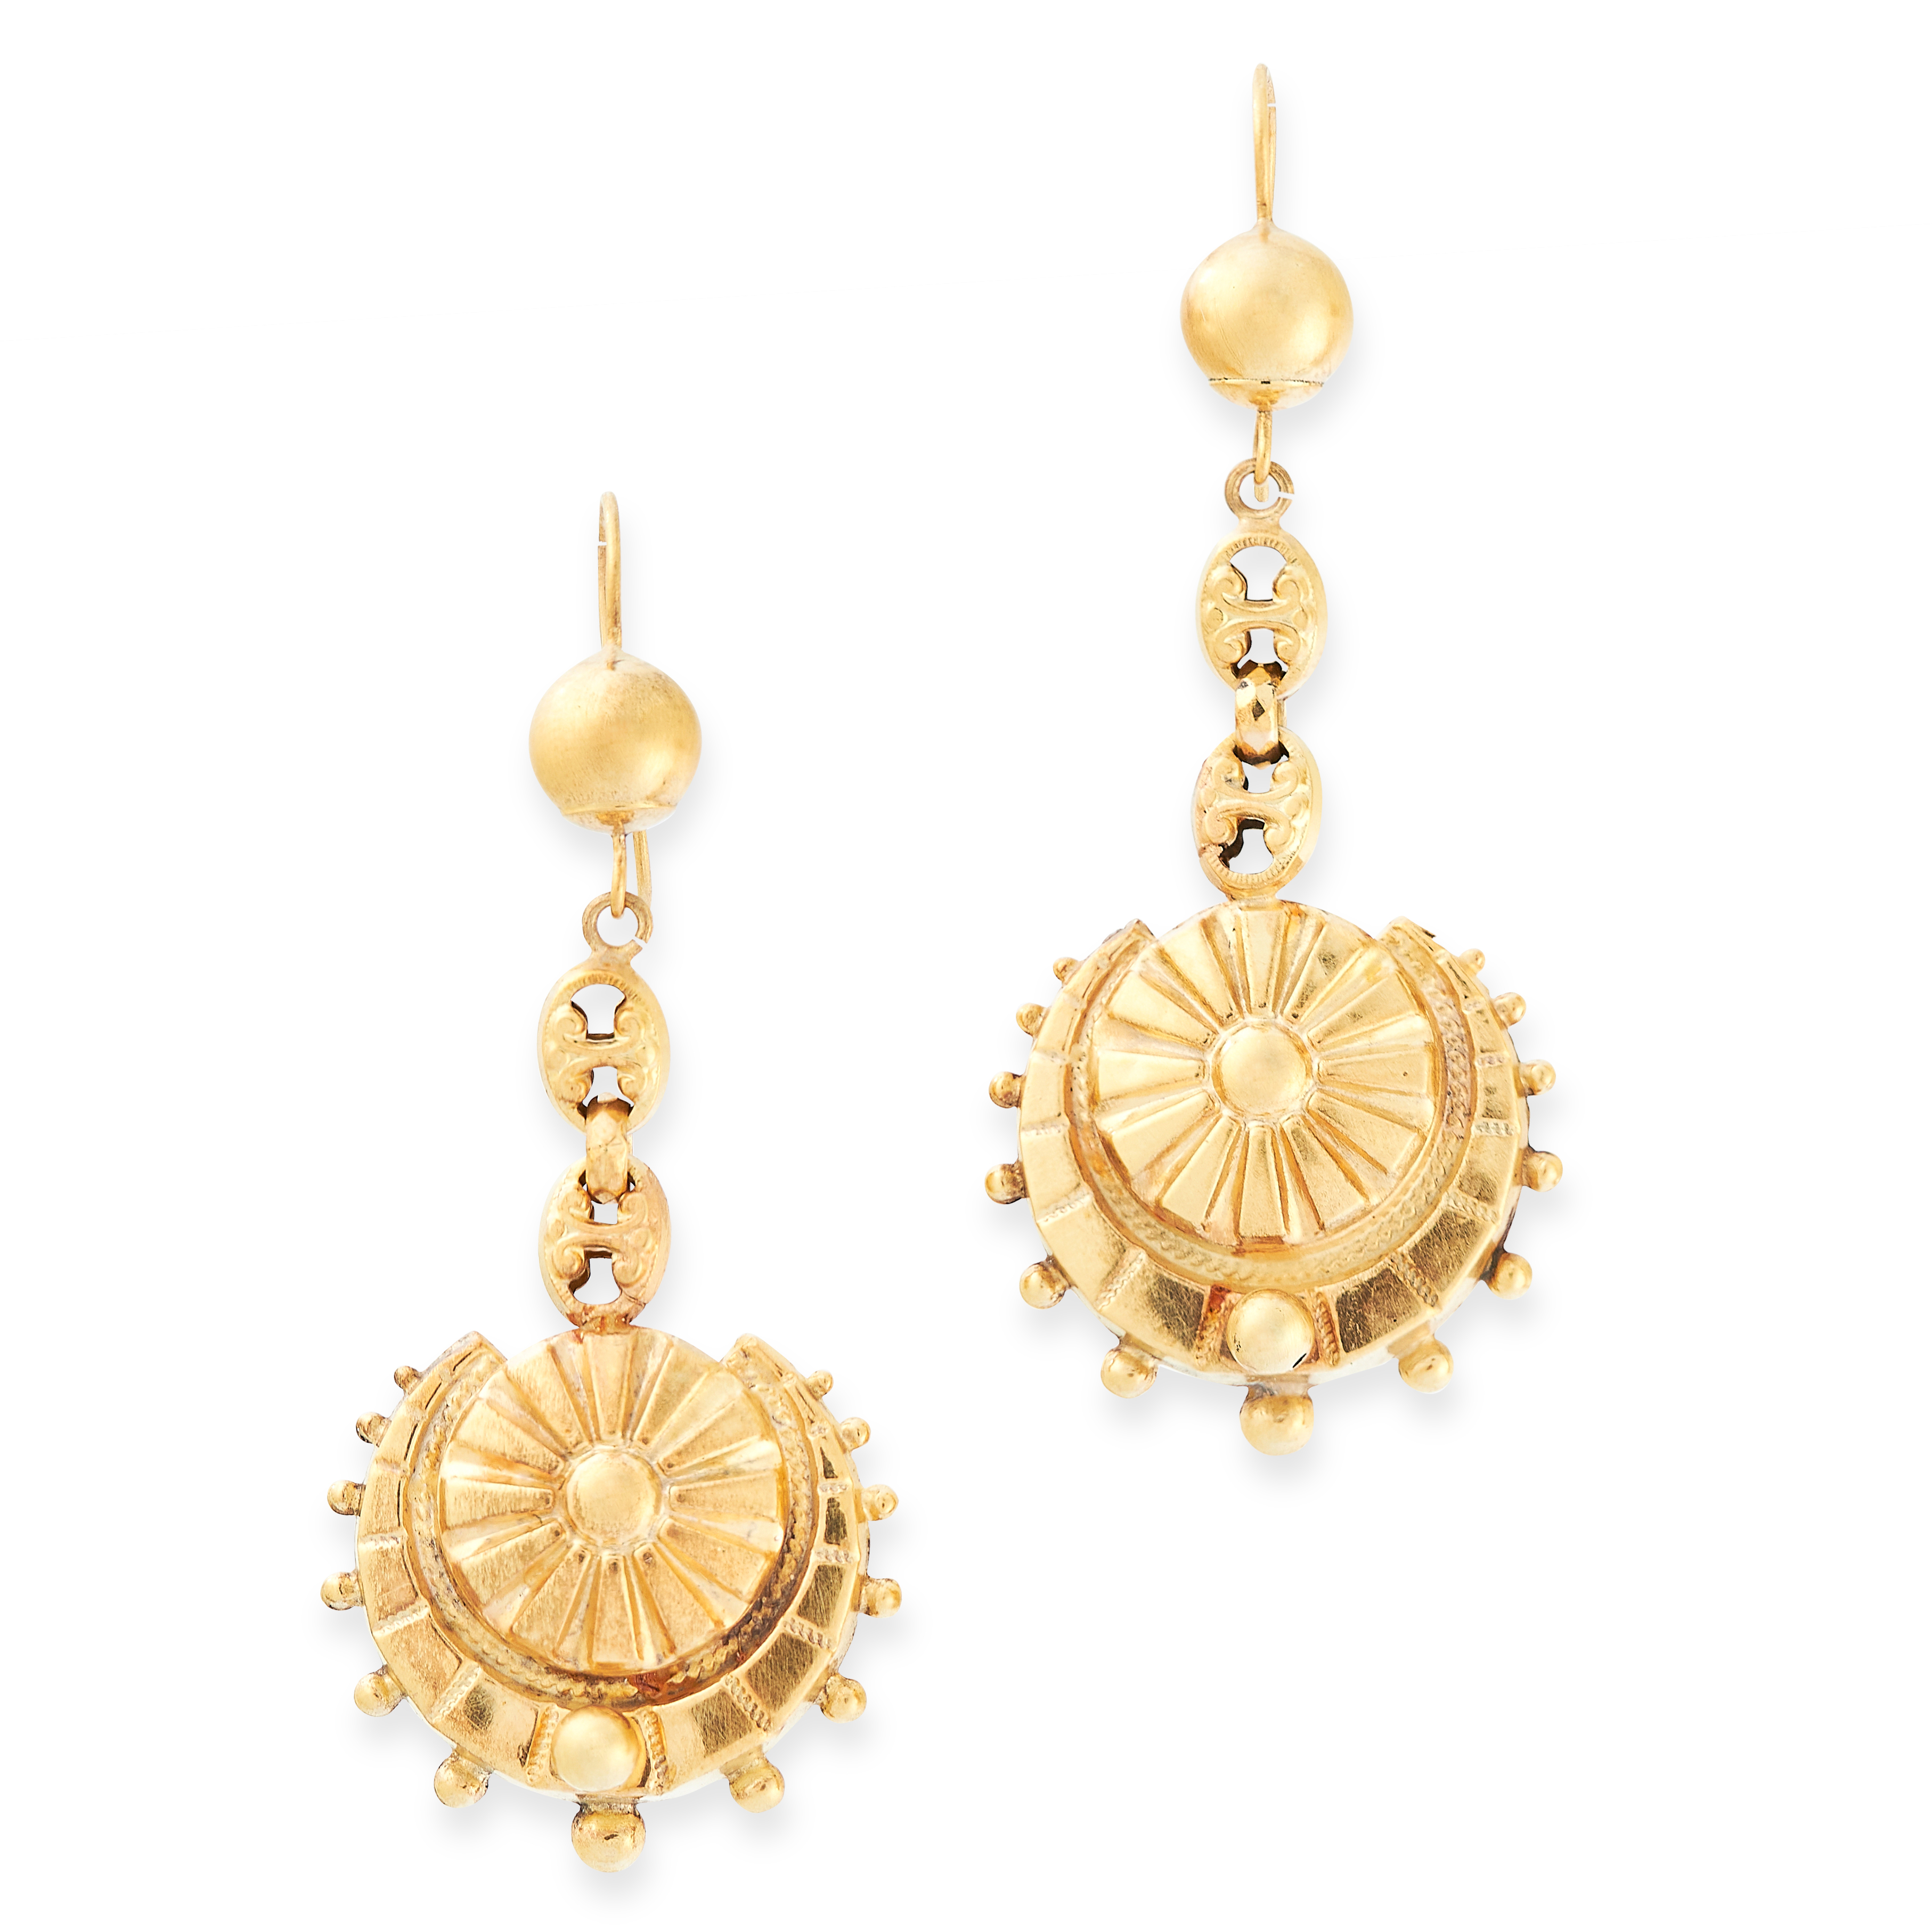 ANTIQUE GOLD DROP EARRINGS, 19TH CENTURY in yellow gold, each set with a gold bead suspending two